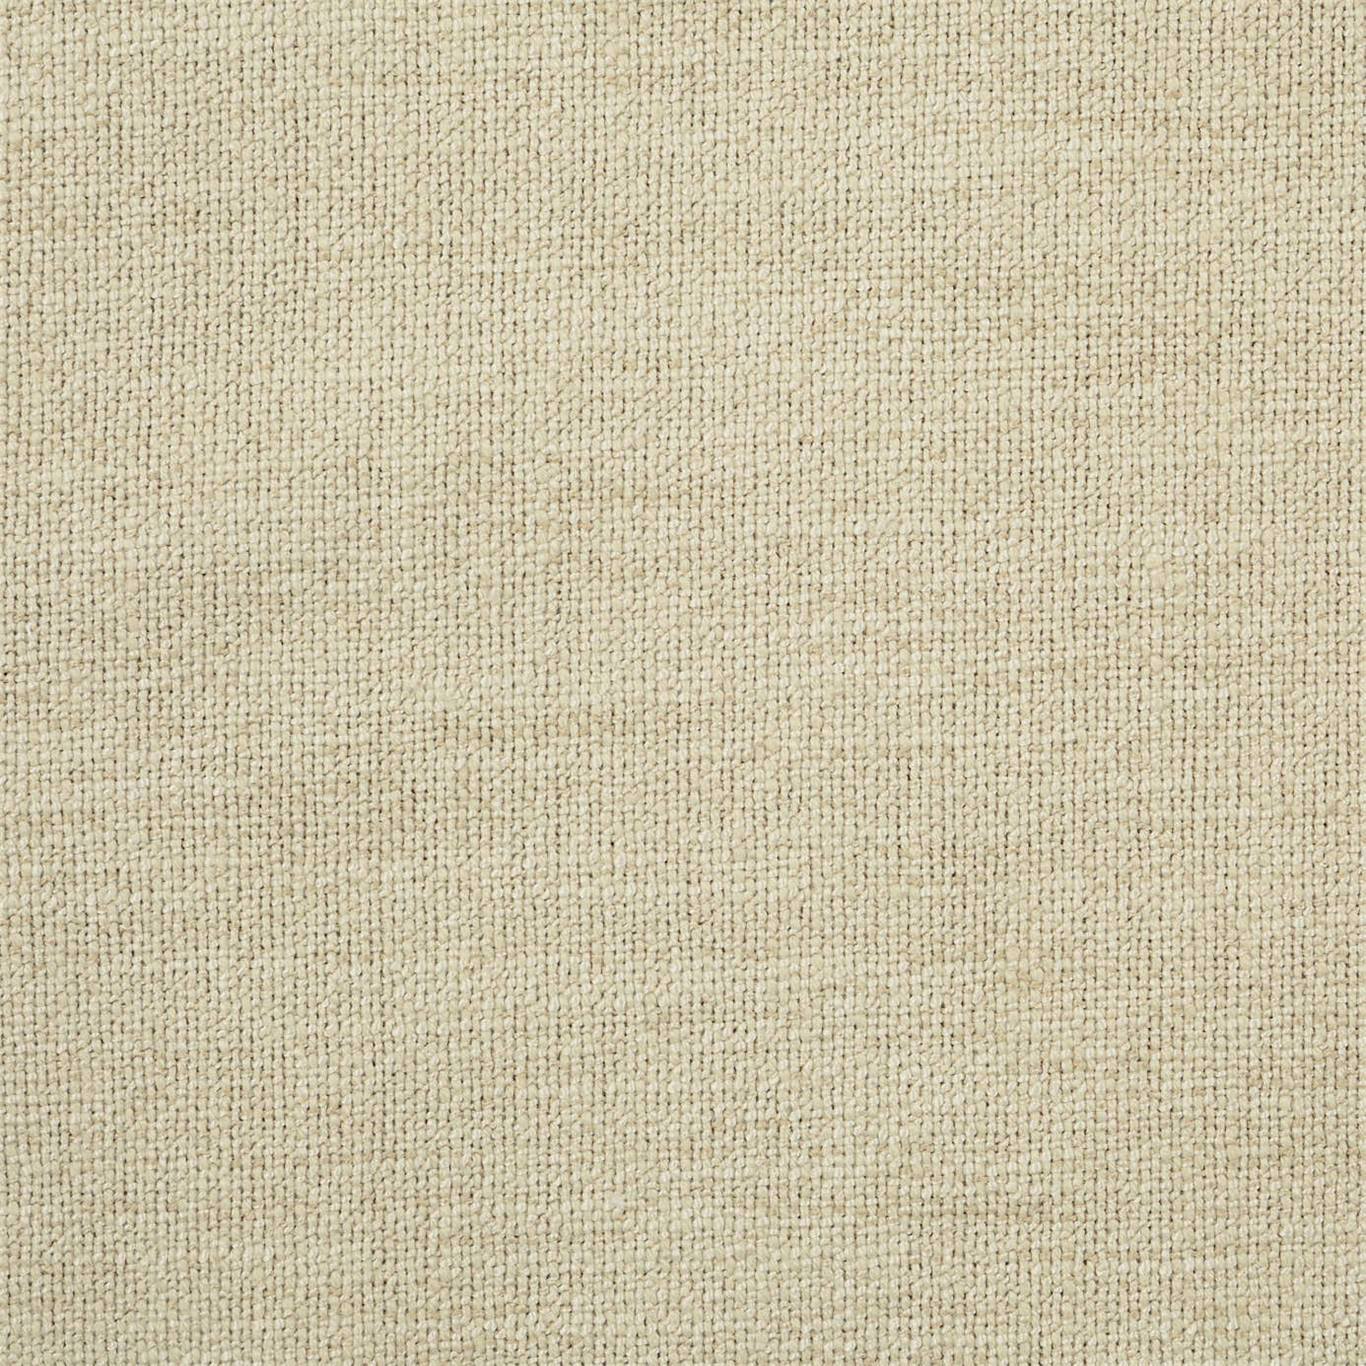 Subject Linen Fabric by HAR